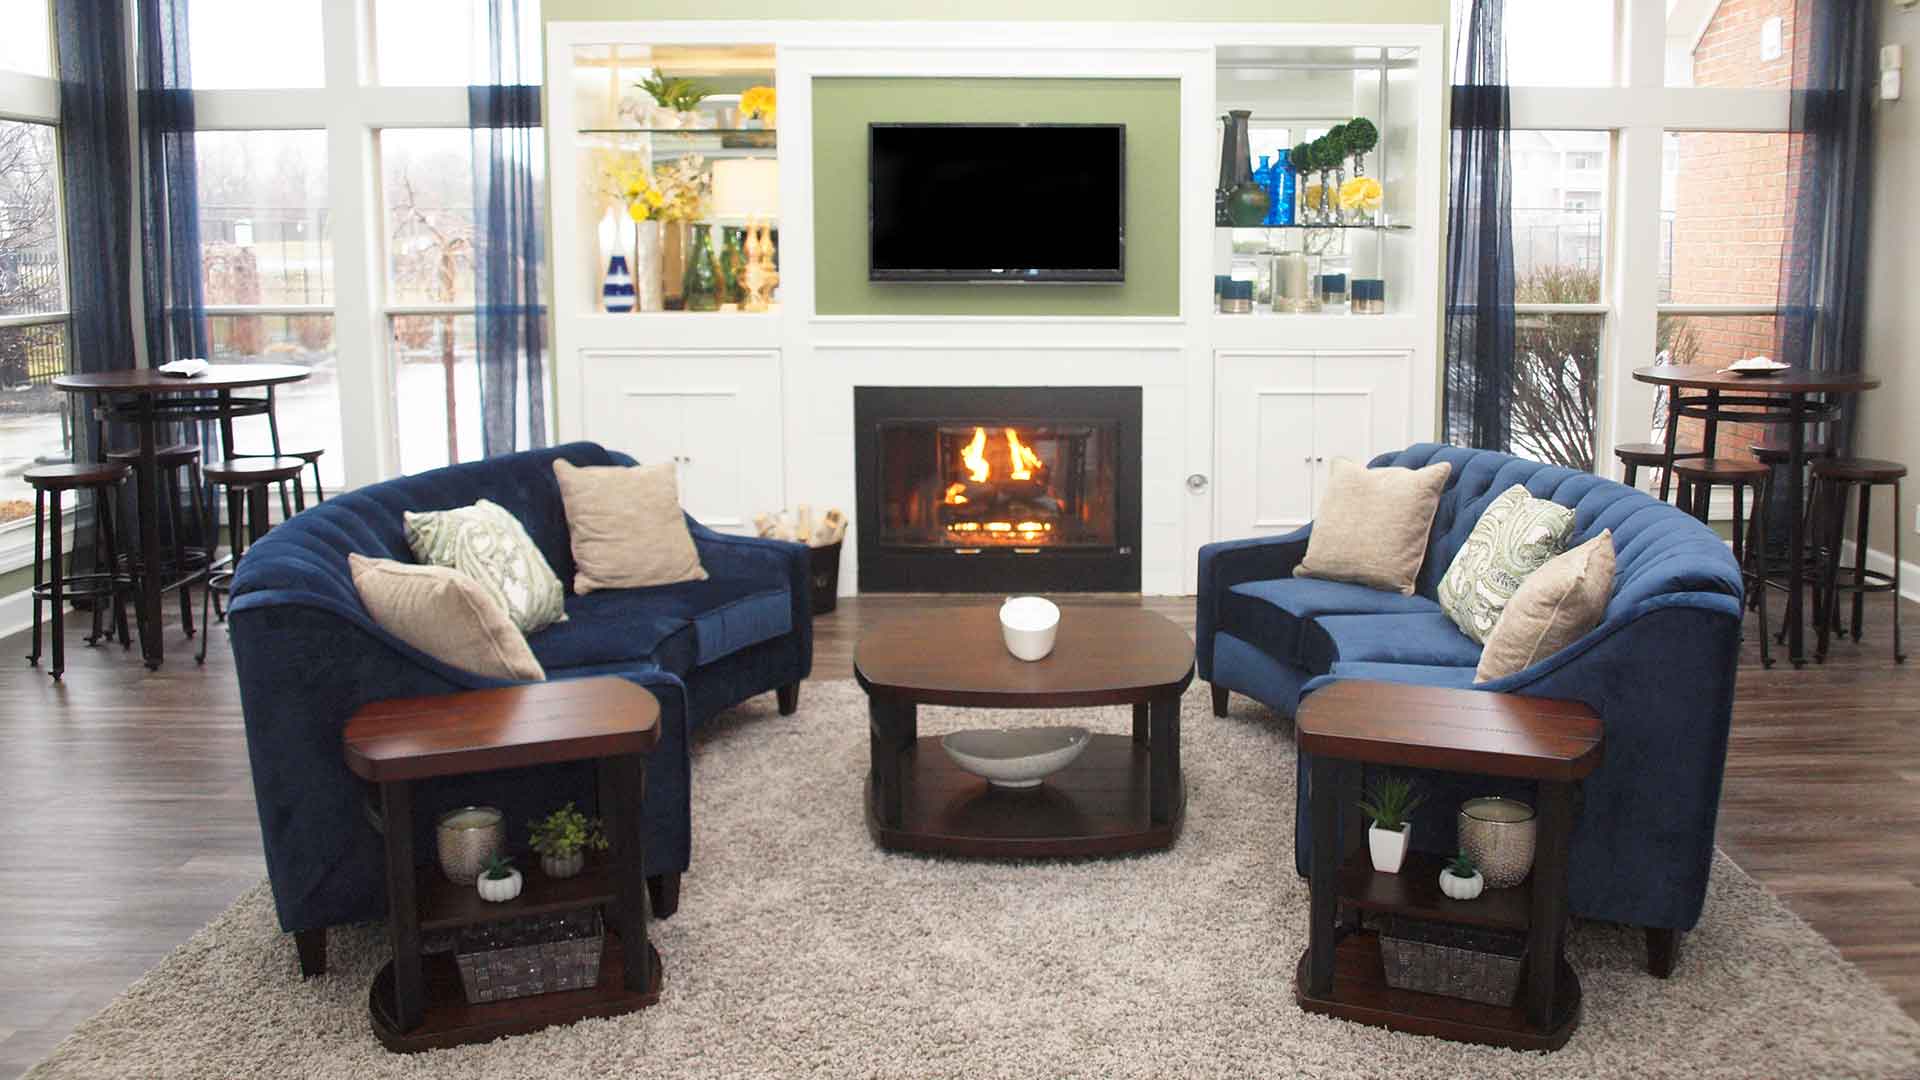 Decorated resident clubhouse with a TV and fireplace at Waterford Place.